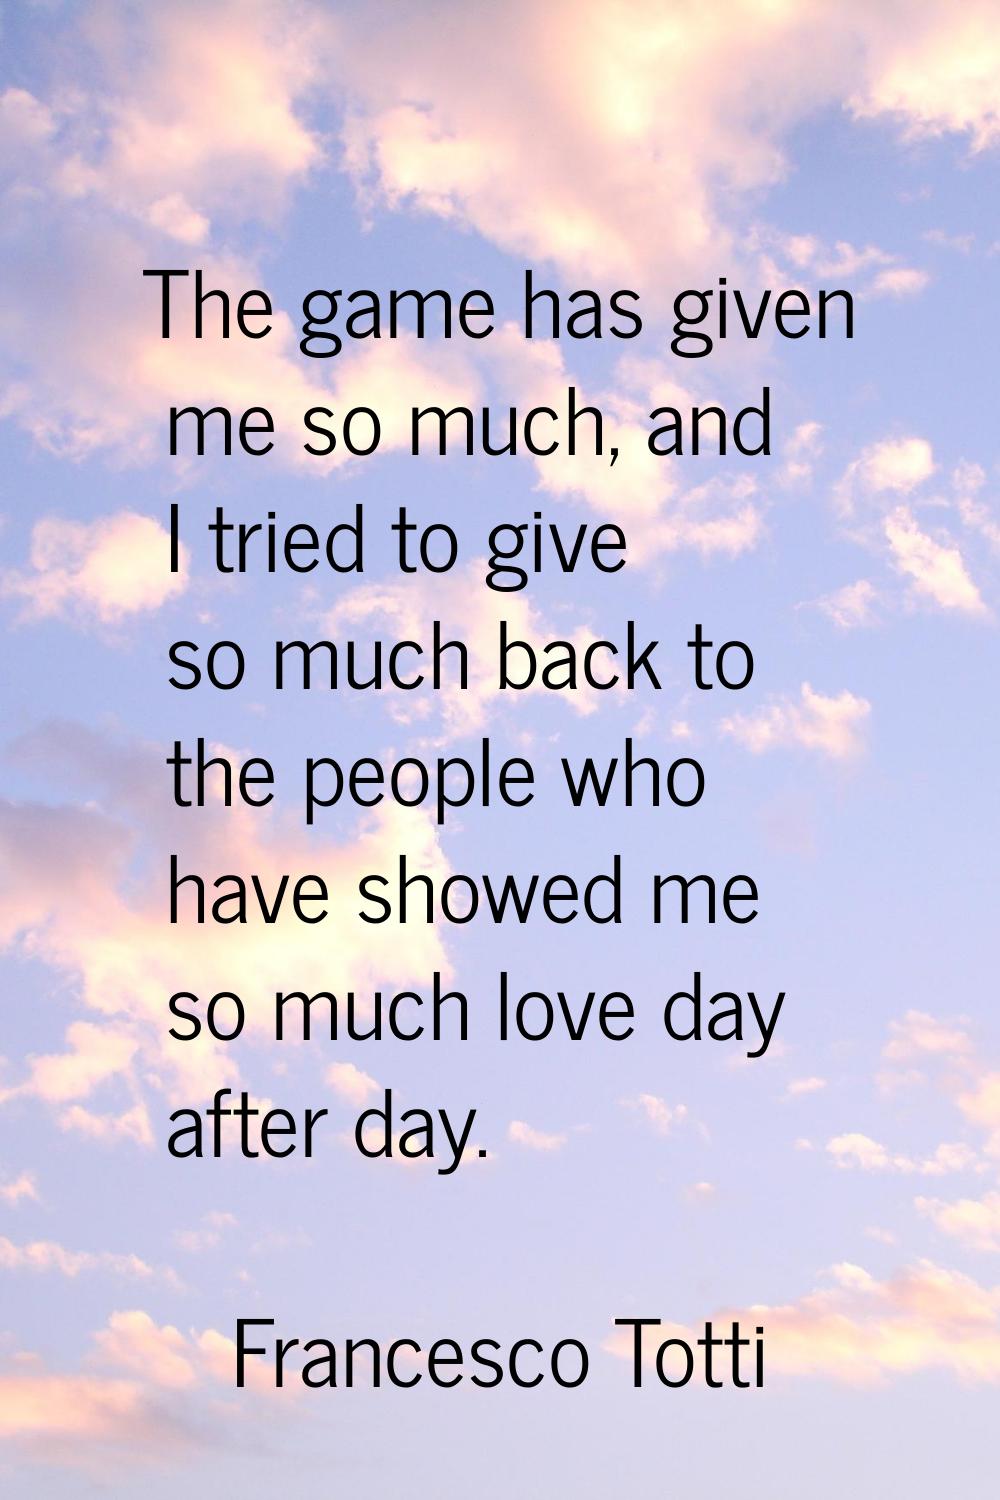 The game has given me so much, and I tried to give so much back to the people who have showed me so